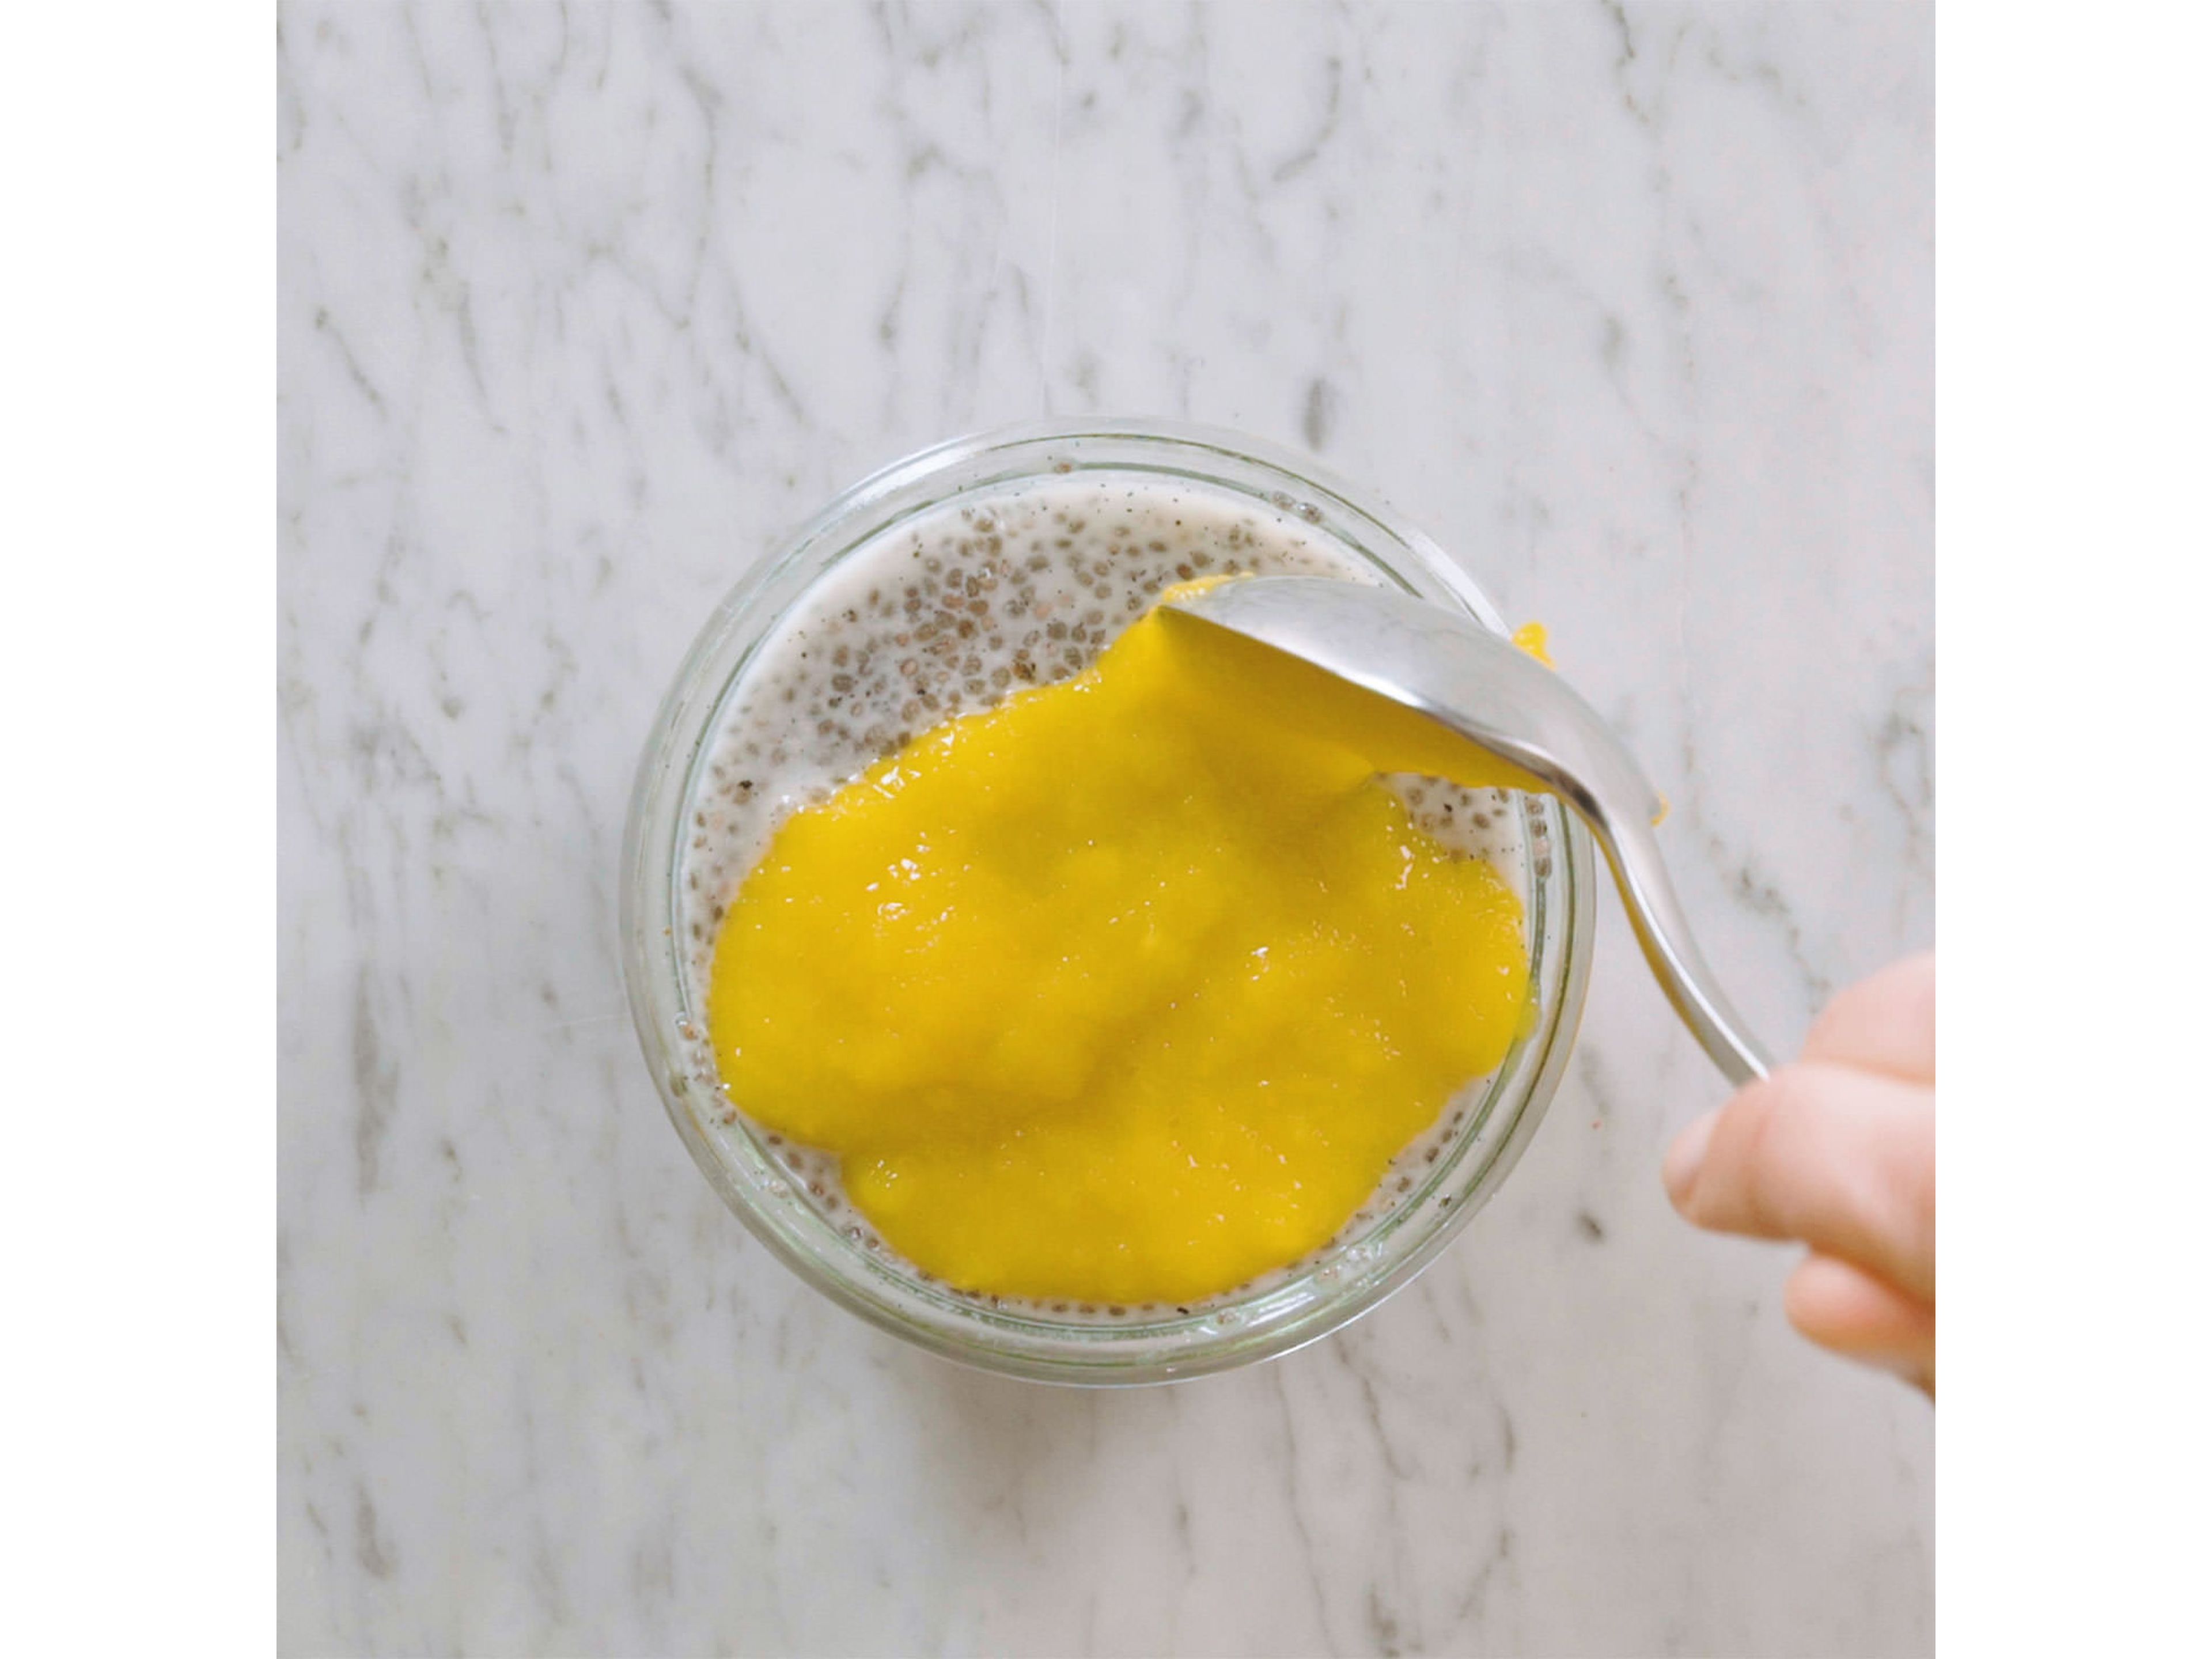 Before serving, peel and cube the mango. Purée in a blender until smooth. Top chia pudding with mango purée and enjoy!